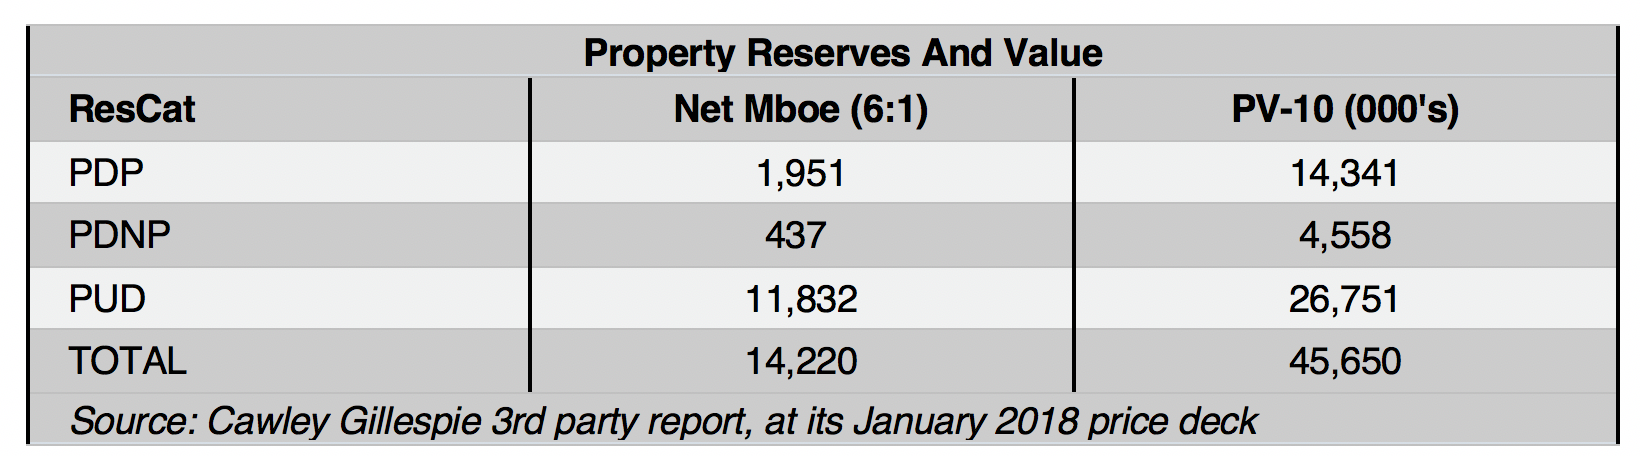 Performance Energy Property Reserves And Value